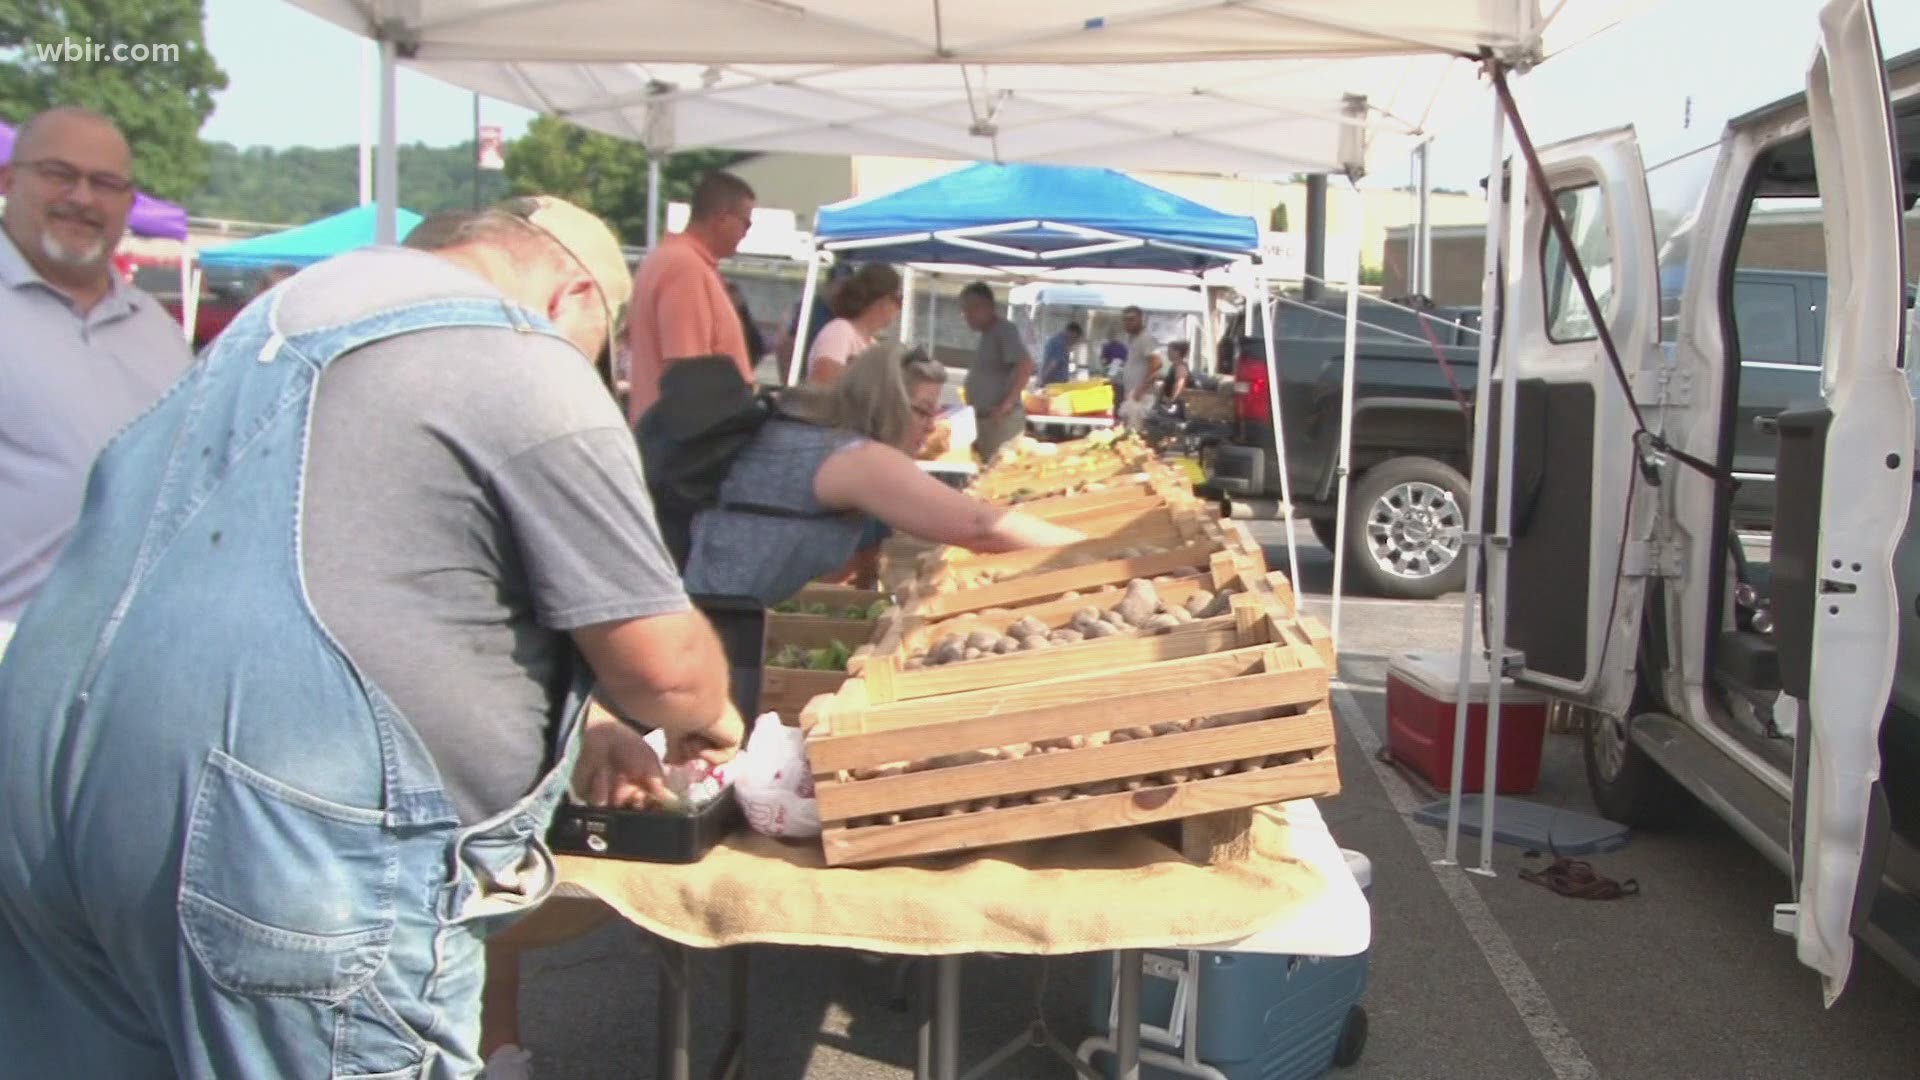 The Clinton farmers' market held a ribbon-cutting ceremony for its newest downtown location.